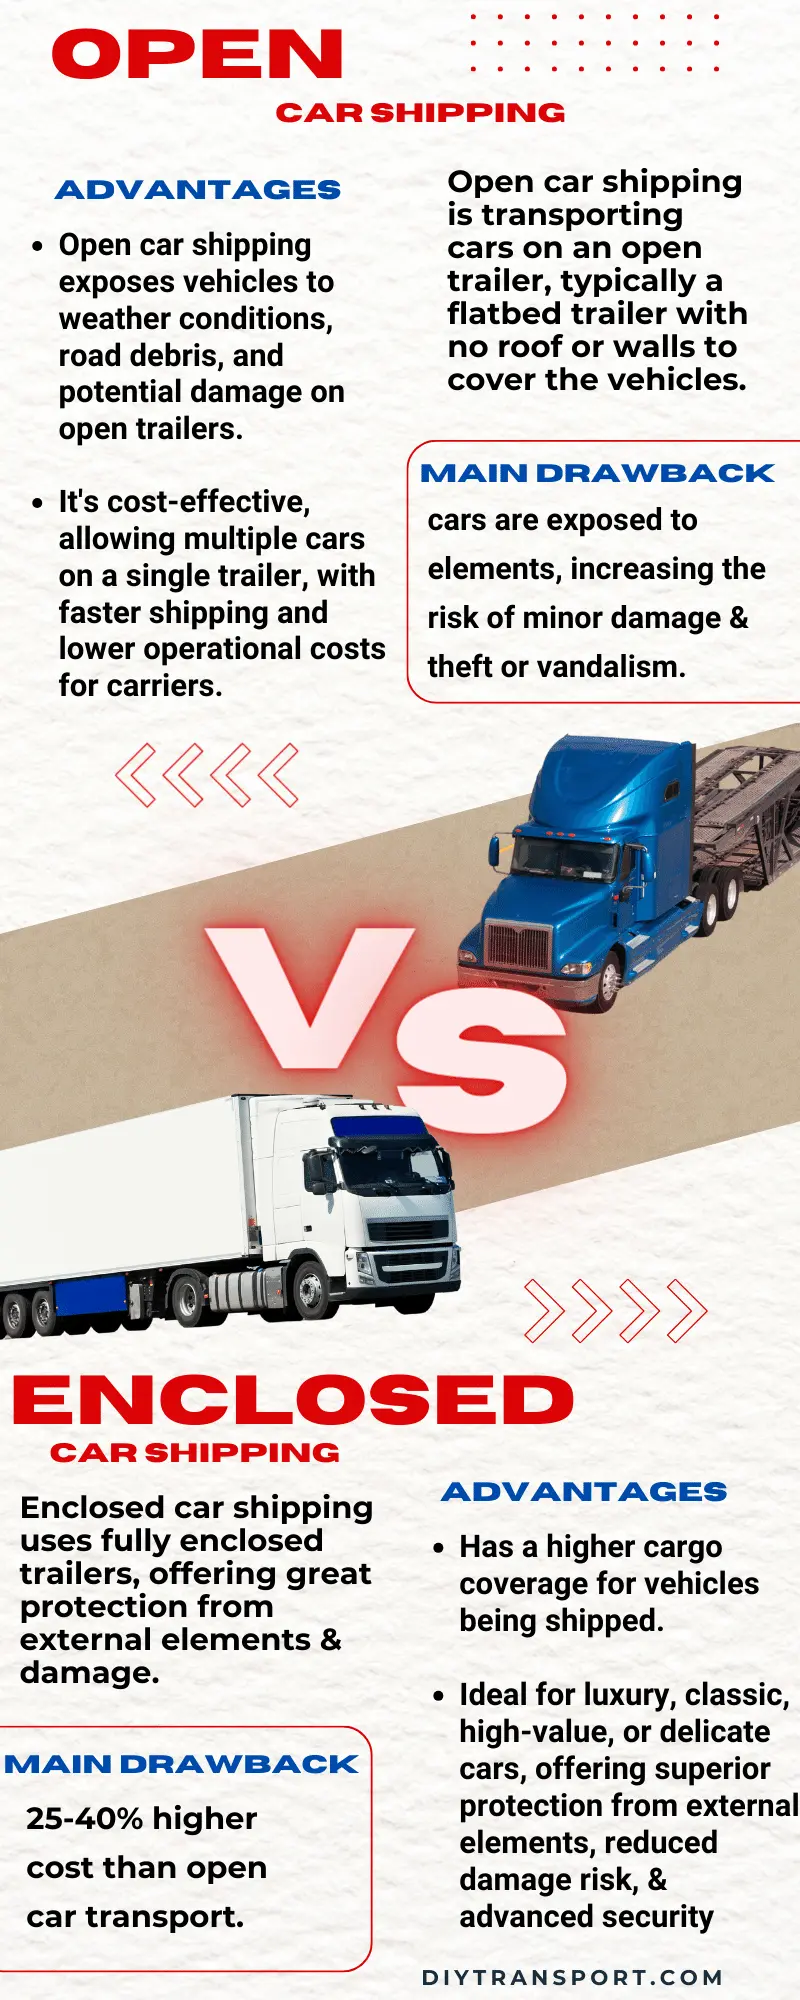 What Is The Difference Between Open And Enclosed Car Shipping?